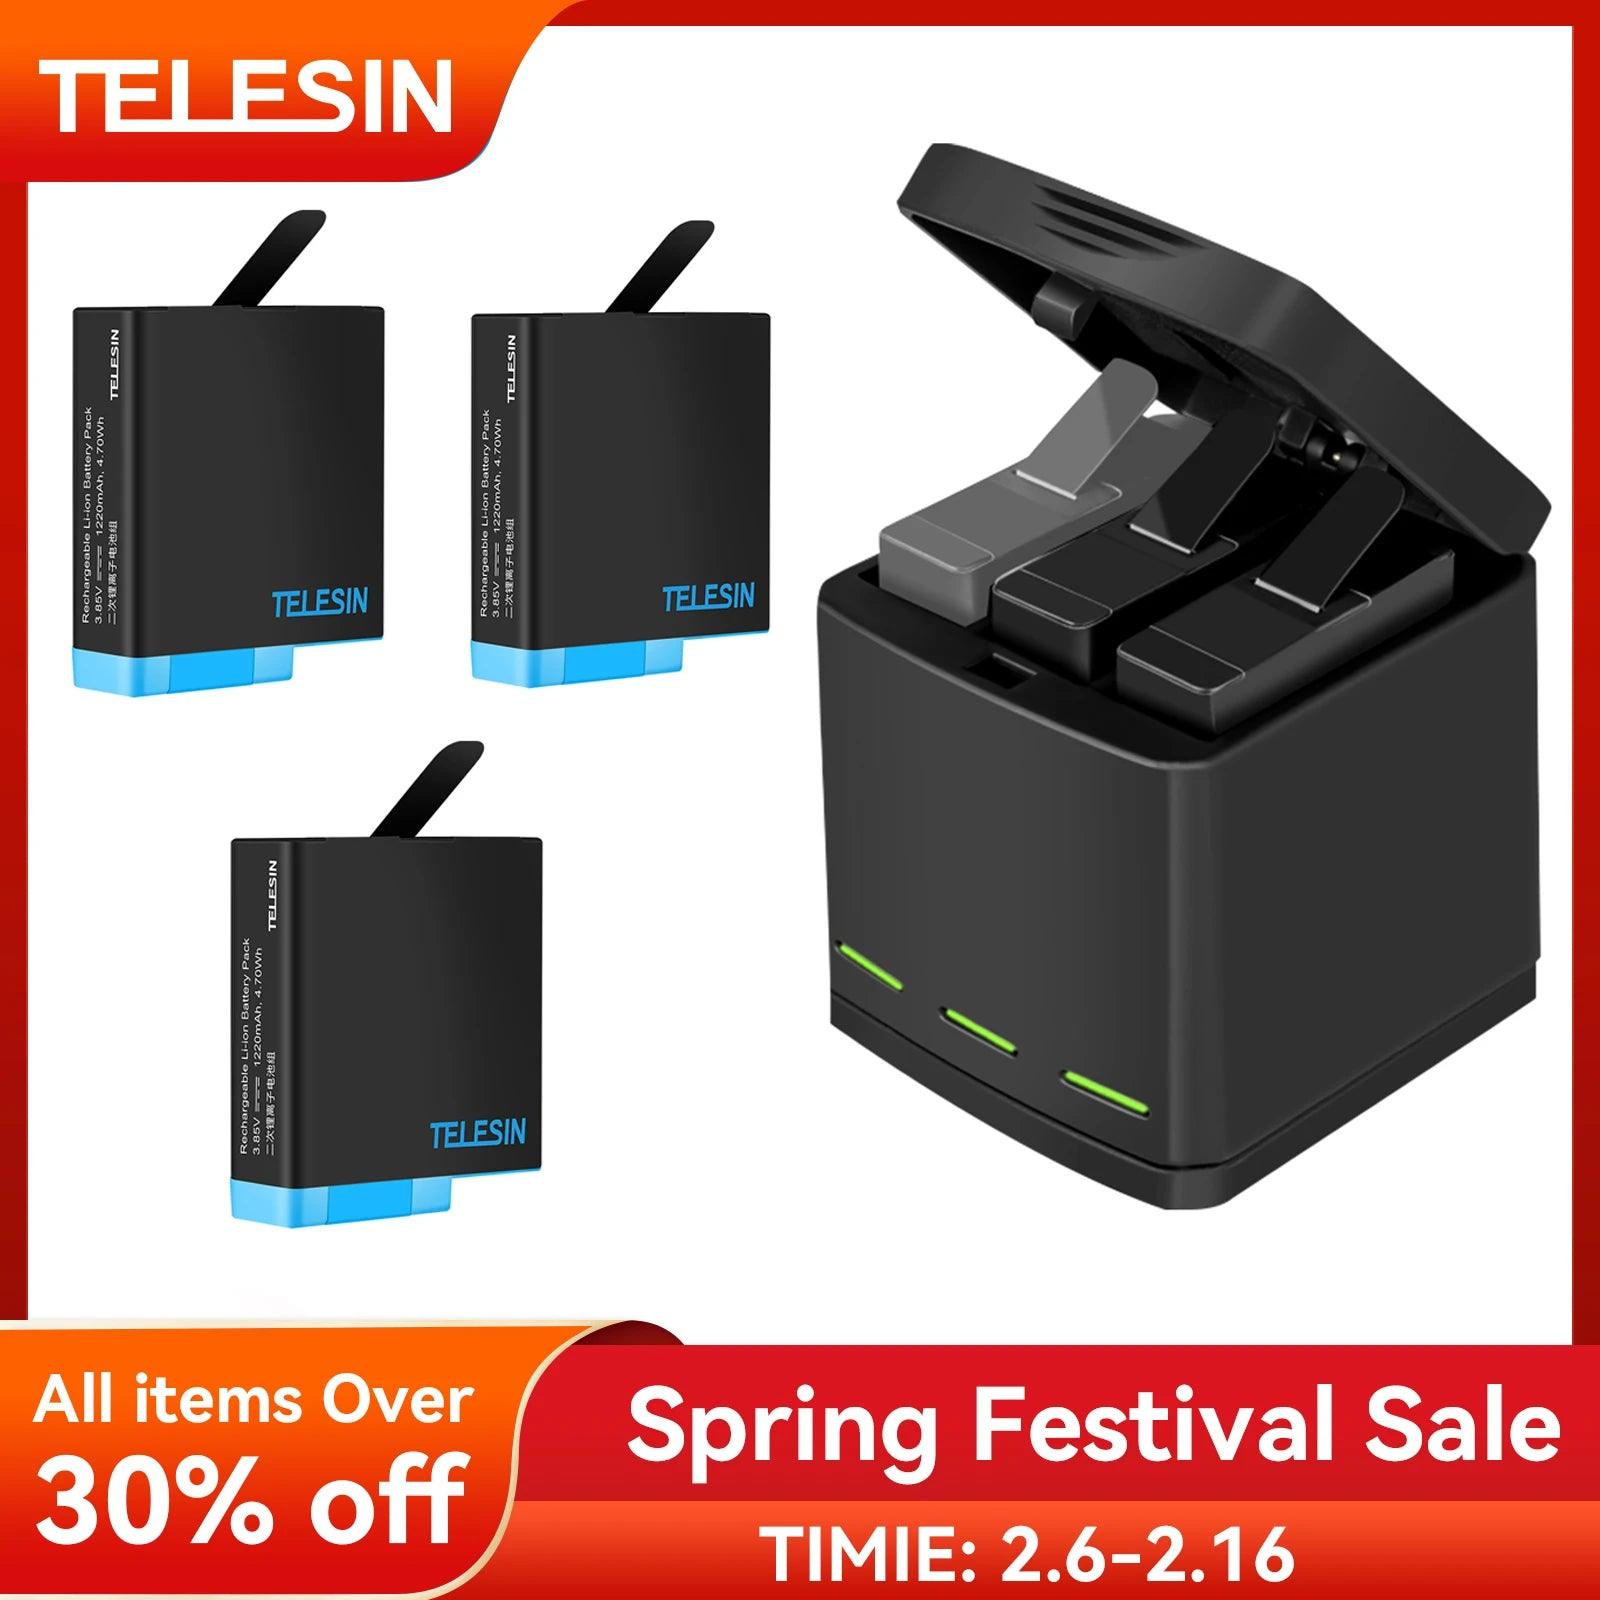 TELESIN Triple Battery Pack with LED Charger for GoPro Hero 5-8 Black Camera  ourlum.com   